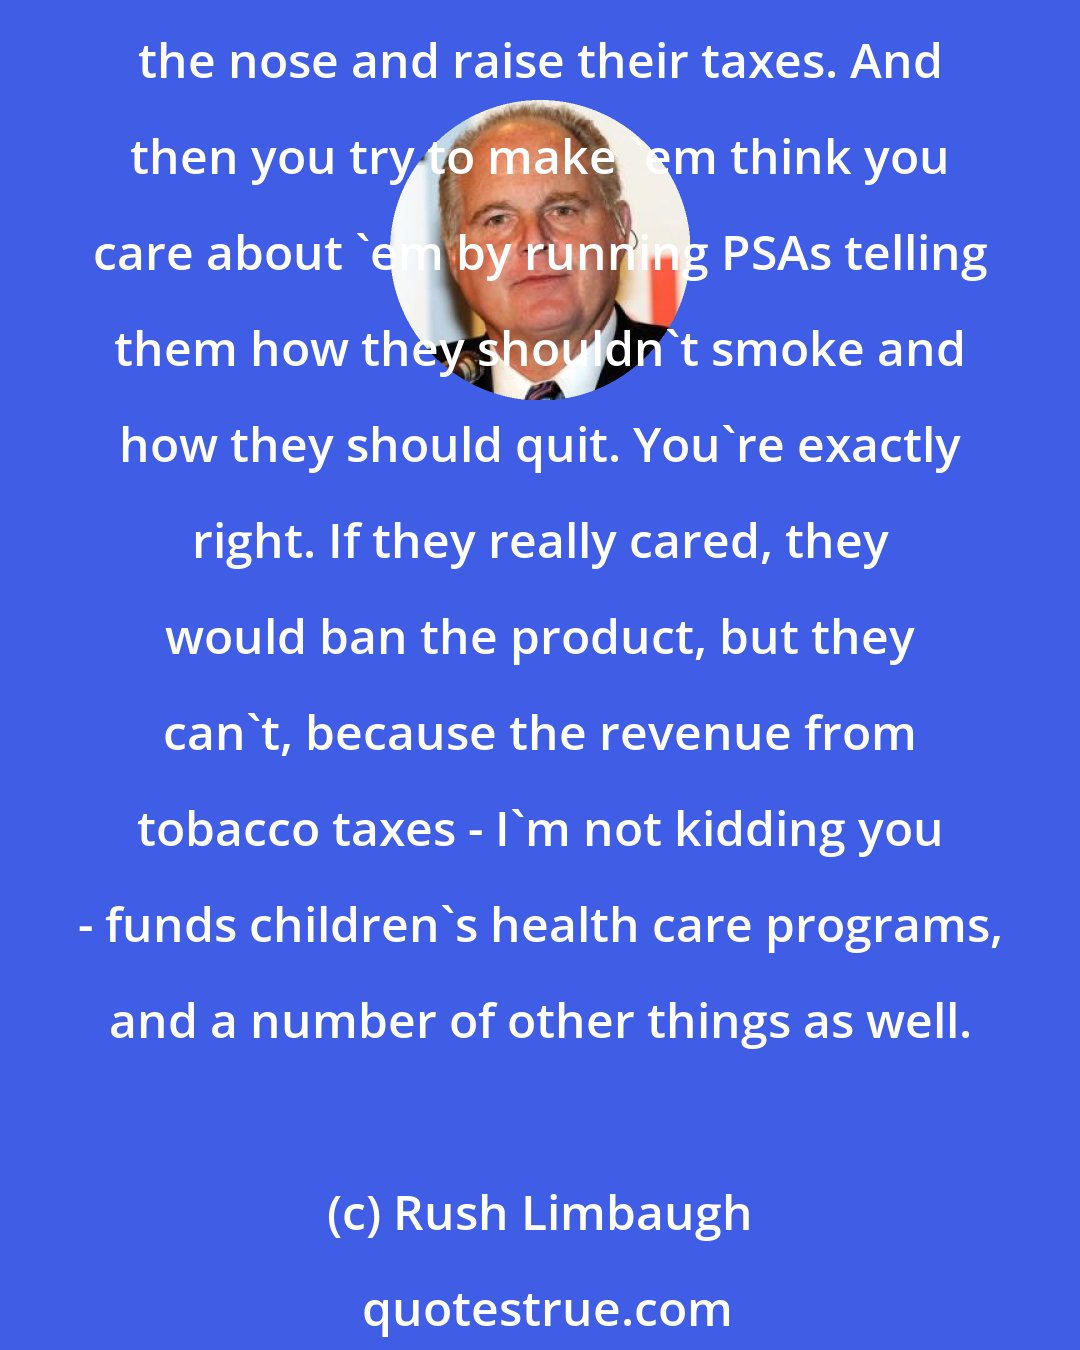 Rush Limbaugh: I thought you liberals cared about people, but here you're perfectly content to get them addicted to tobacco and make them pay taxes through the nose and continue to pay taxes through the nose and raise their taxes. And then you try to make 'em think you care about 'em by running PSAs telling them how they shouldn't smoke and how they should quit. You're exactly right. If they really cared, they would ban the product, but they can't, because the revenue from tobacco taxes - I'm not kidding you - funds children's health care programs, and a number of other things as well.